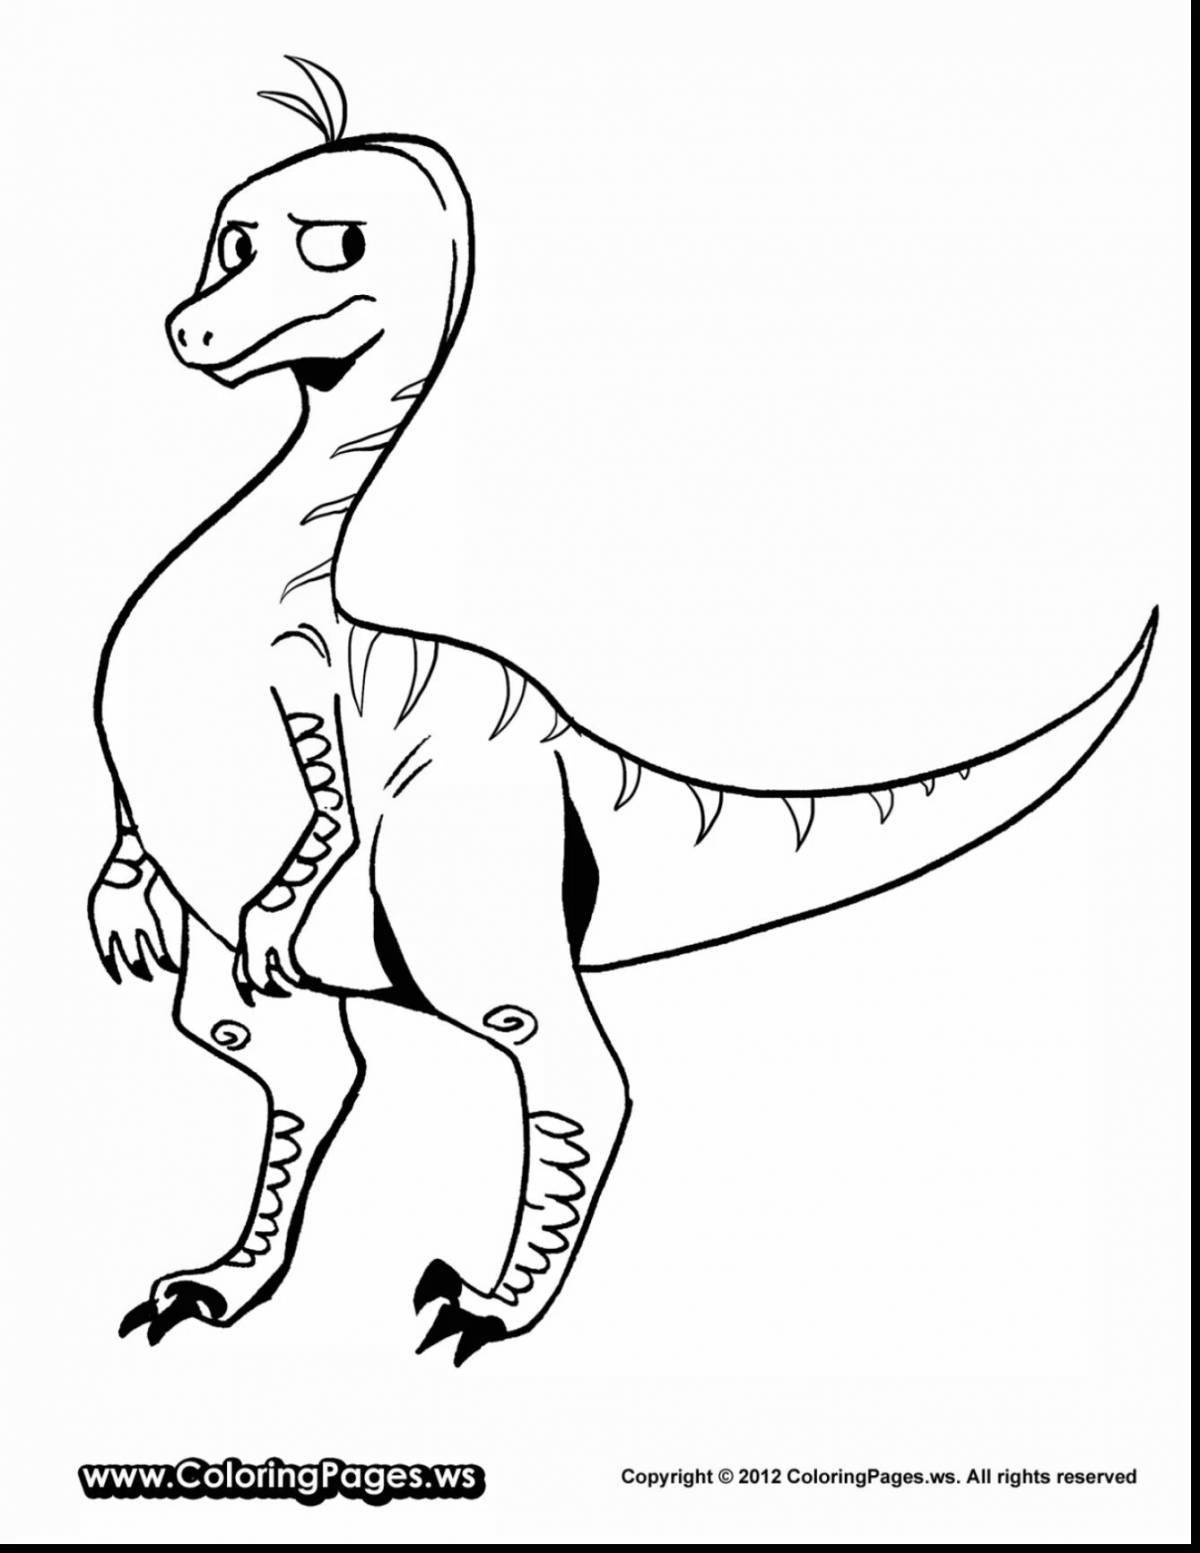 Powerful velociraptor coloring page